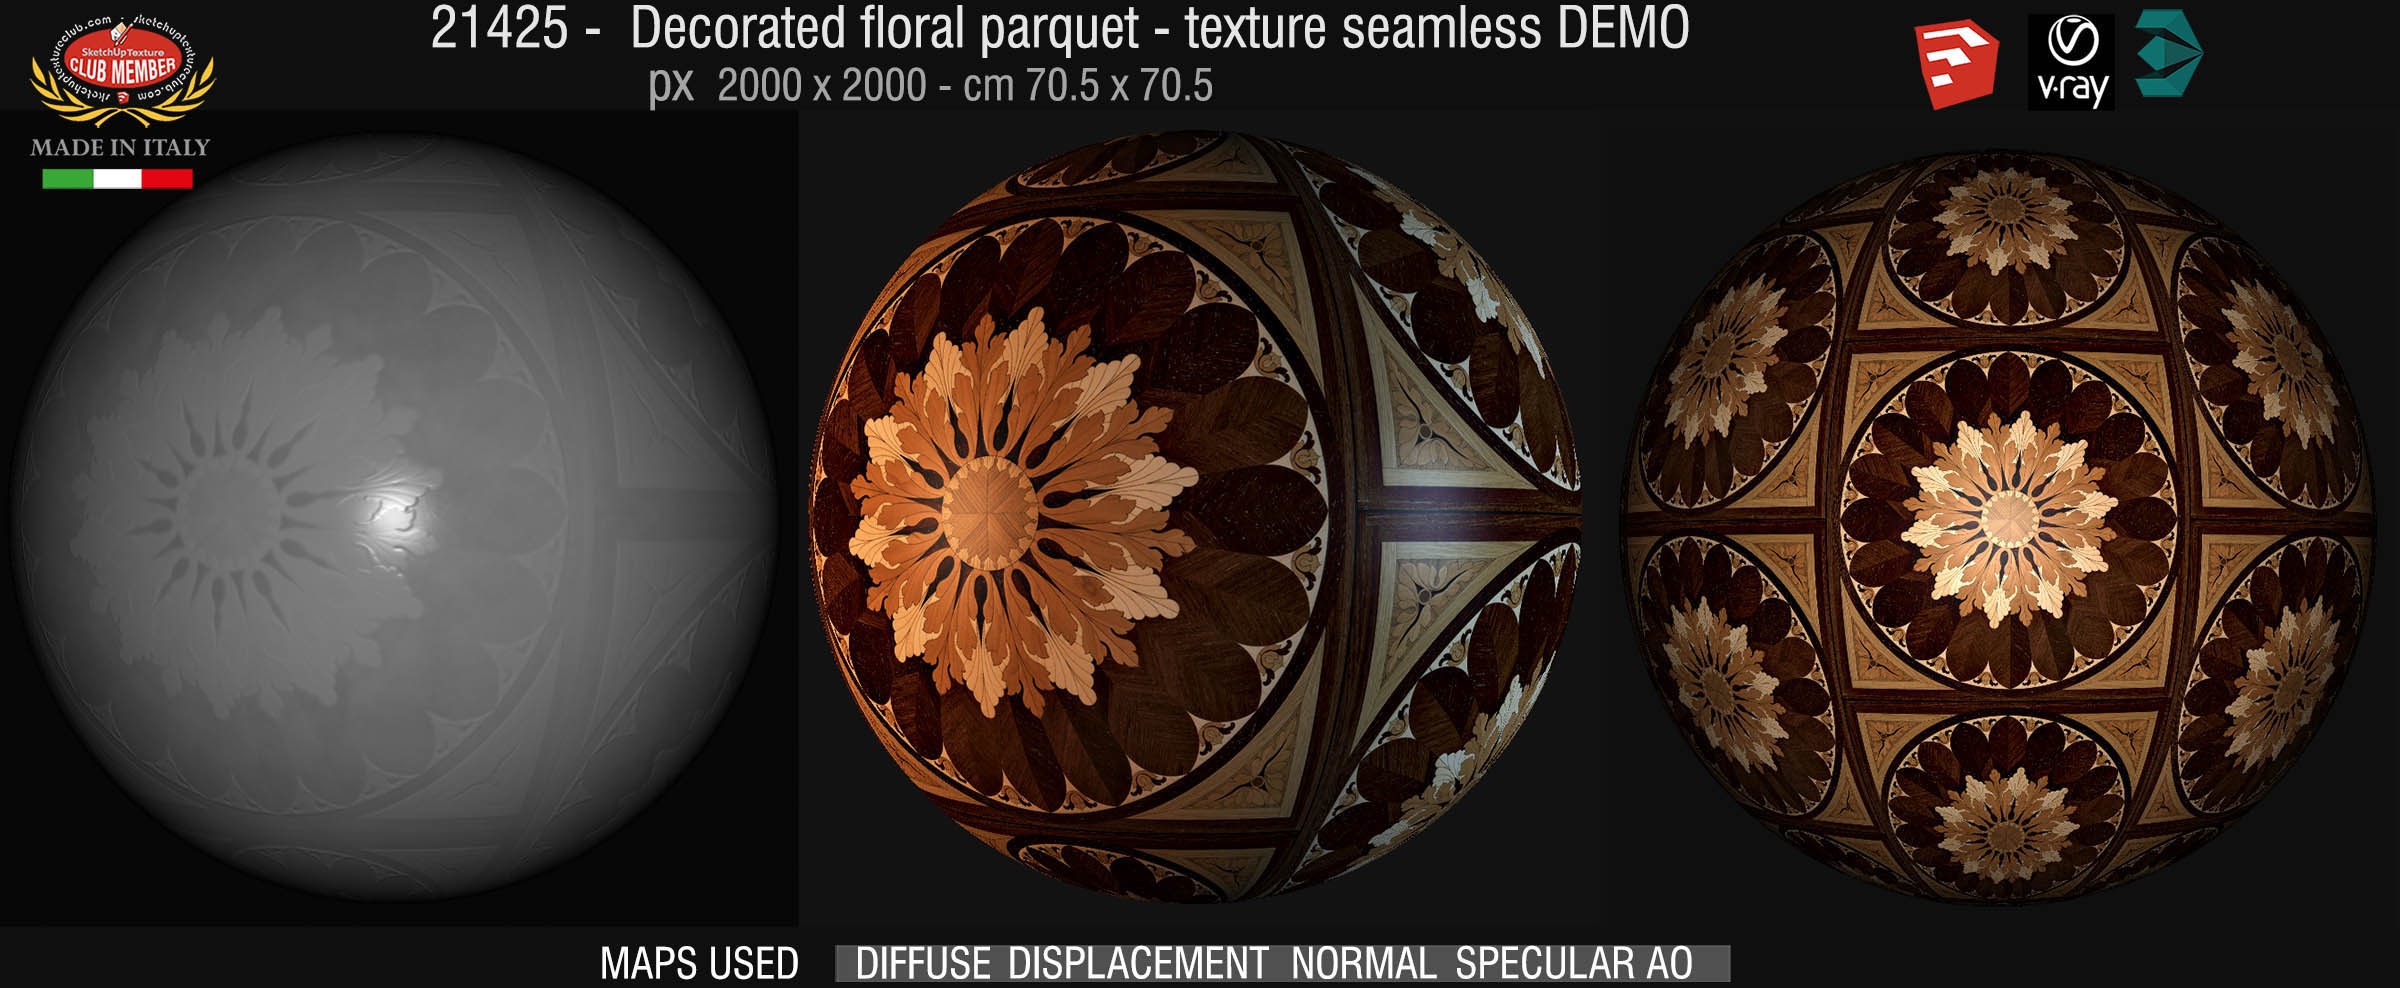 21425 decorated floral parquet texture seamless + maps DEMO